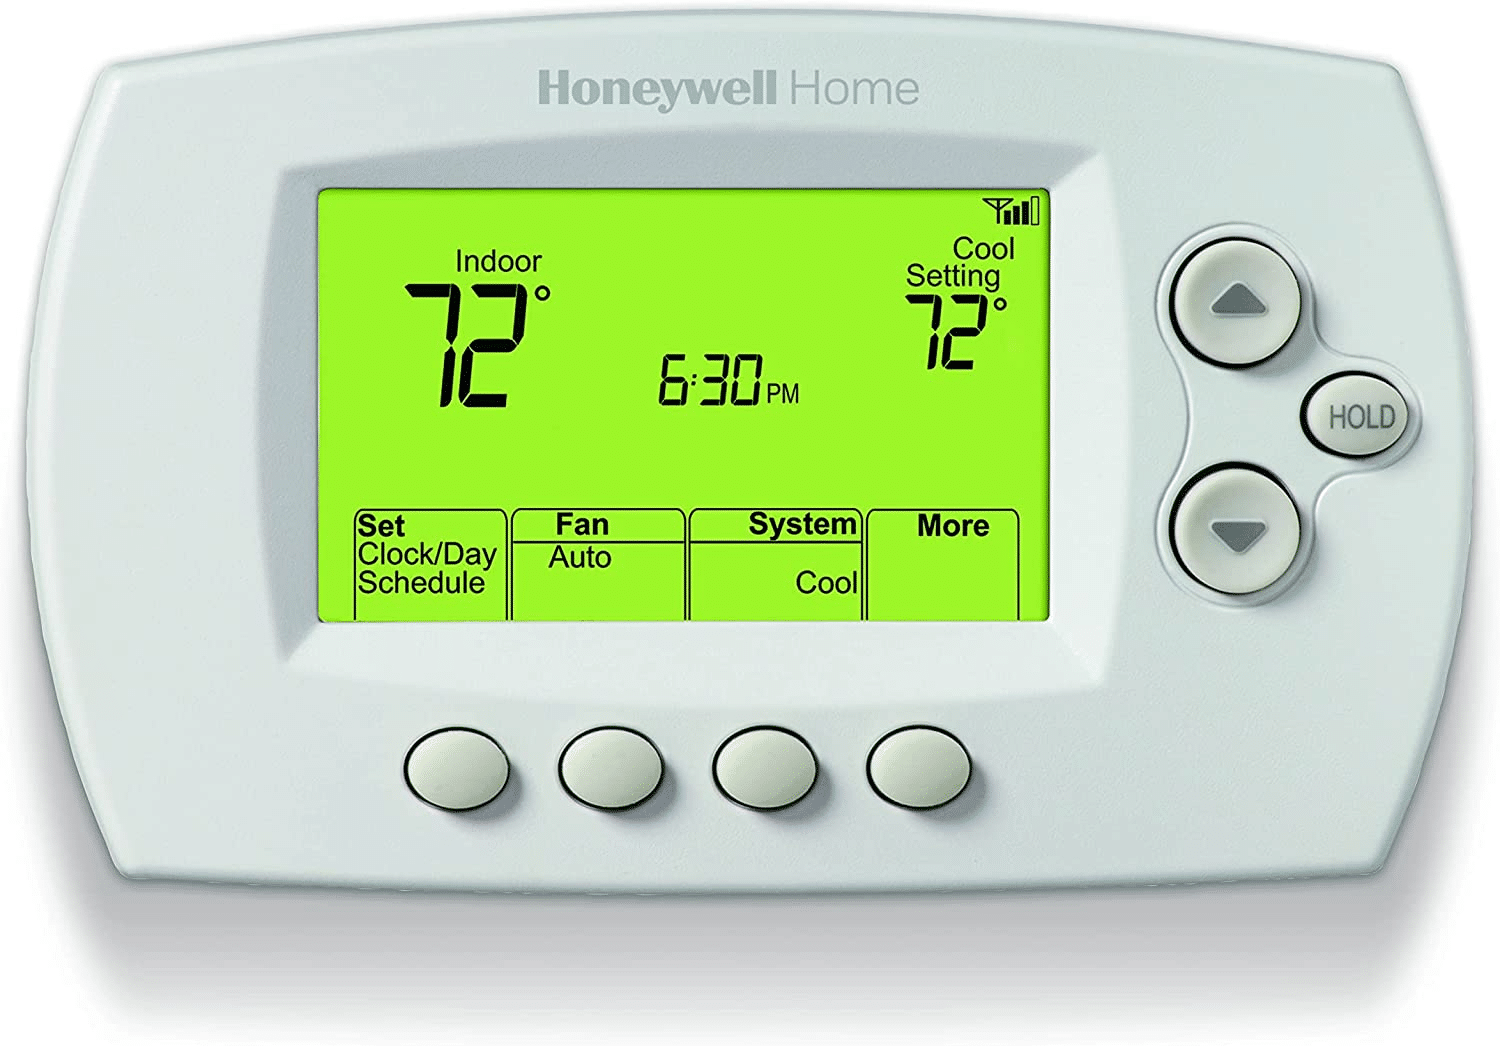 Troubleshooting Honeywell Thermostat - Cool On Blinking - Shrink